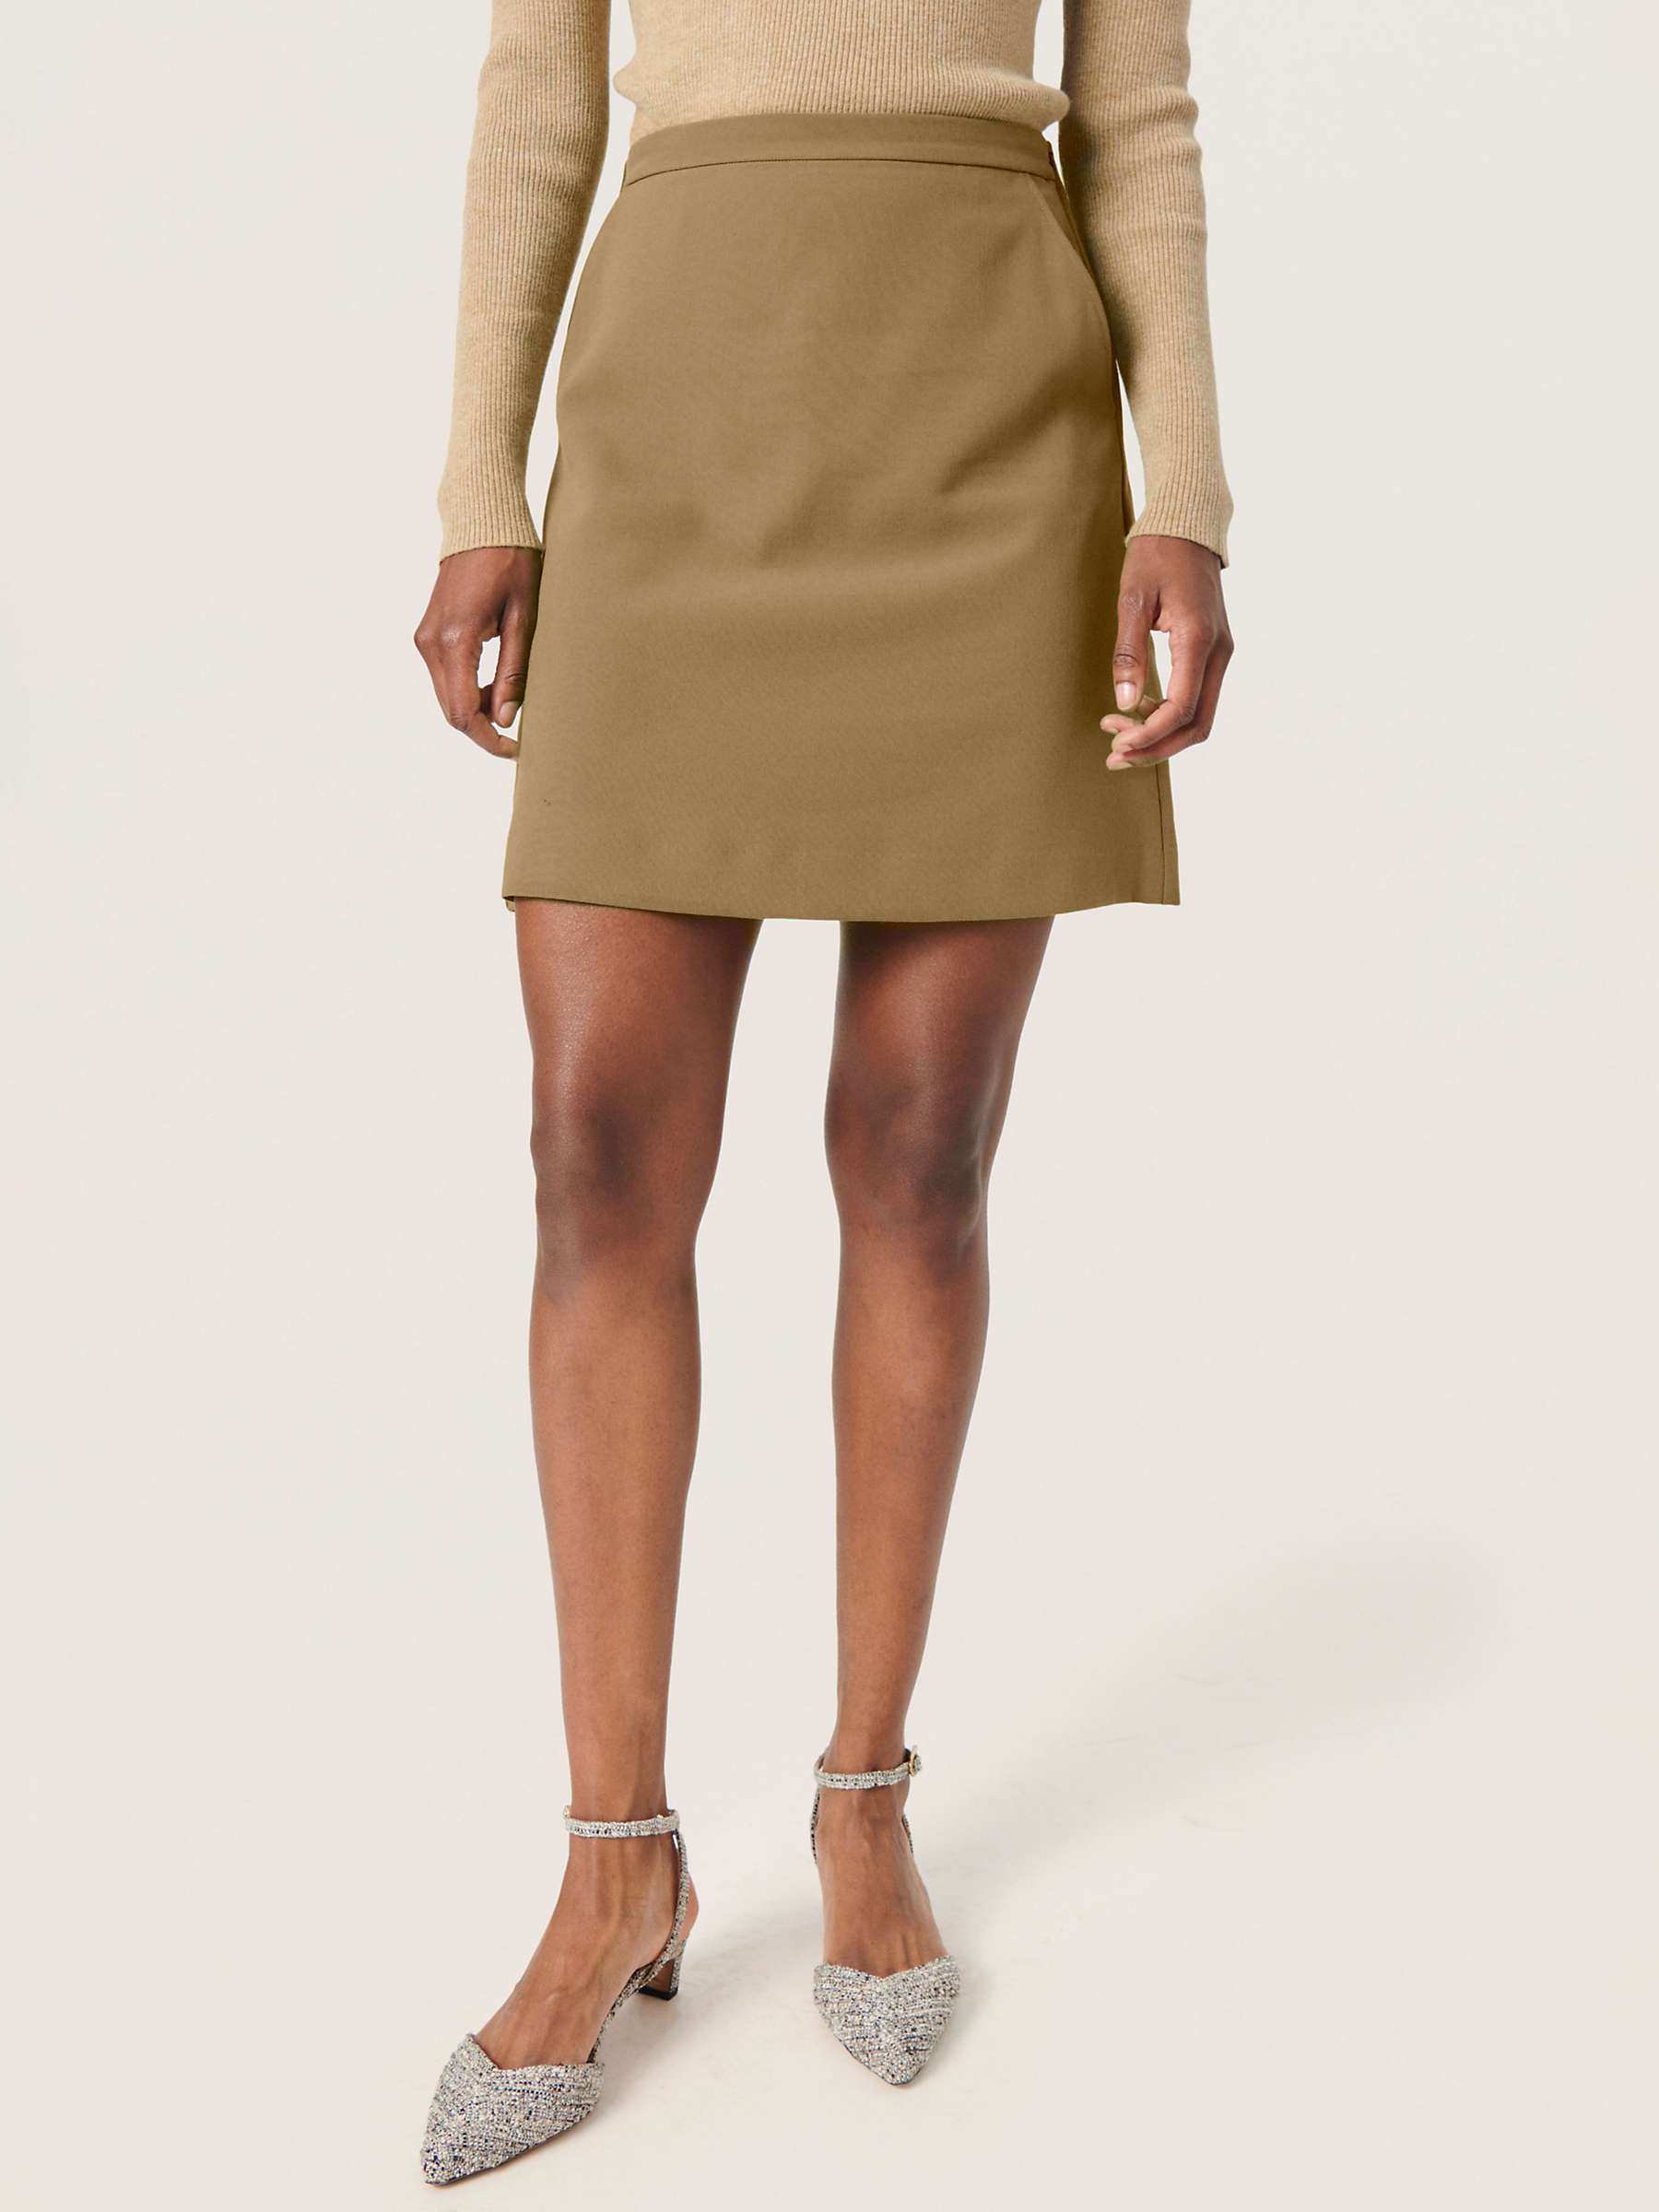 Buy Soaked In Luxury Corinne A-Line Silhouette Mini Skirt Online at johnlewis.com